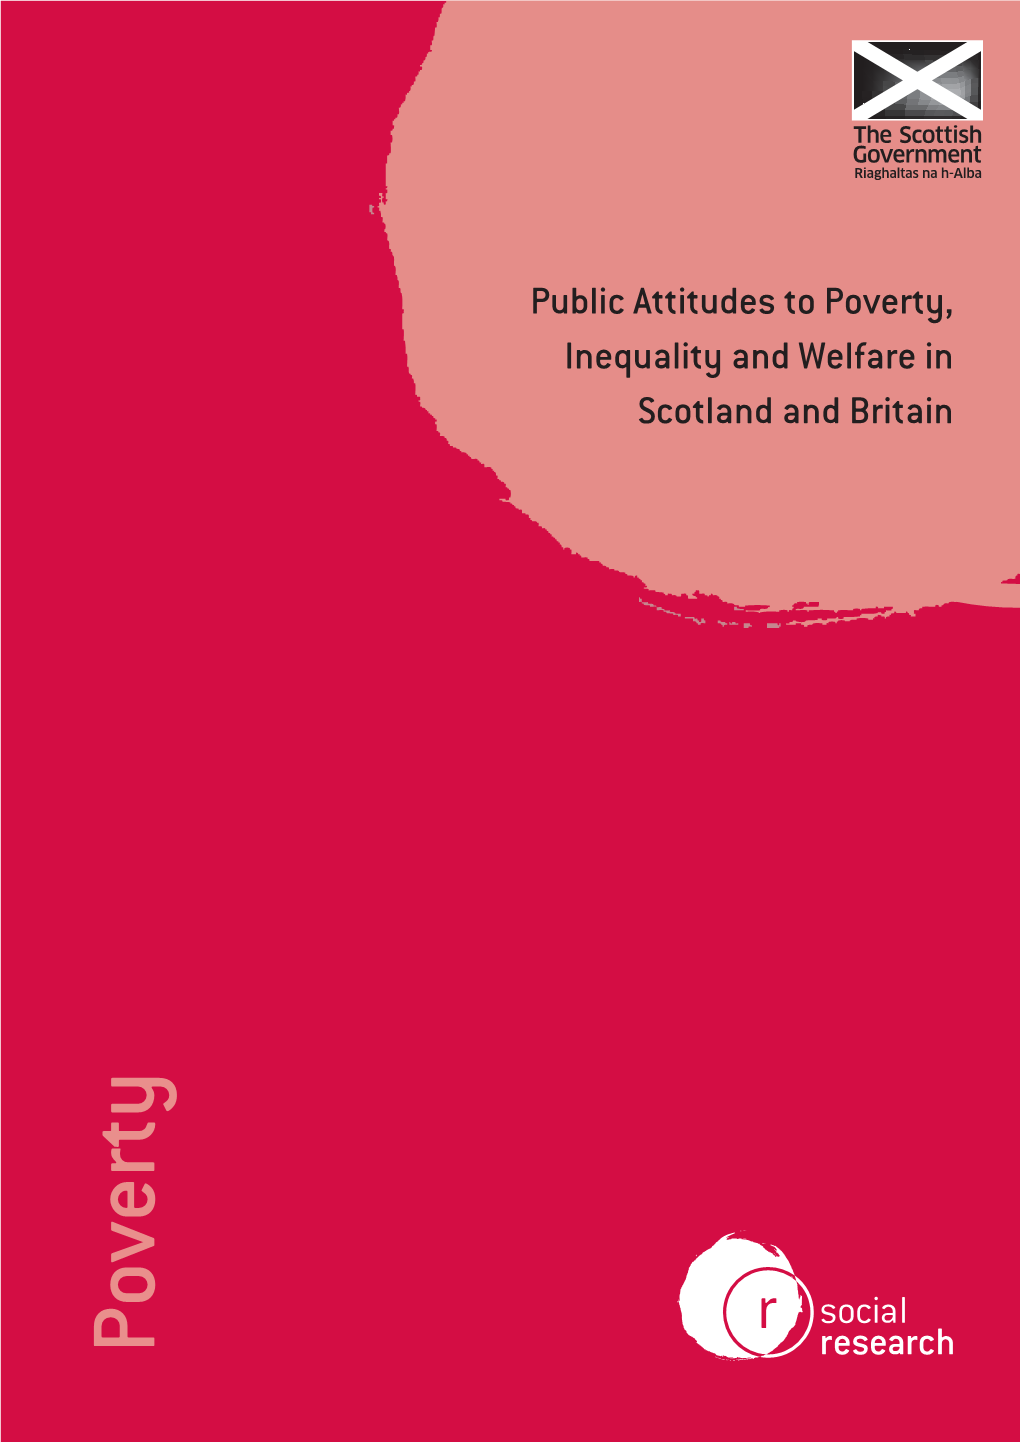 Public Attitudes to Poverty, Inequality and Welfare in Scotland and Britain